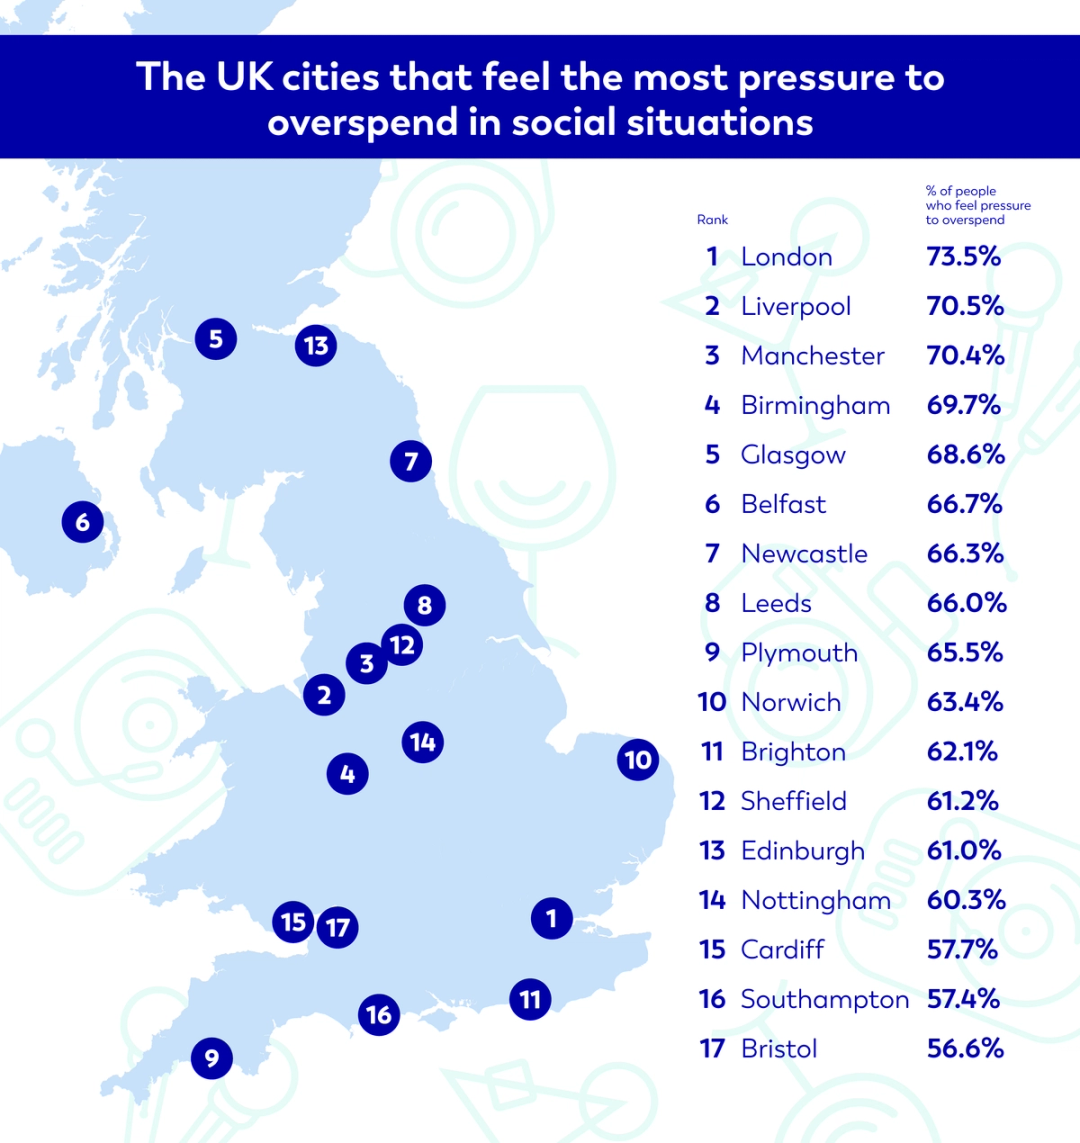 Infographic showing a map of the UK and the cities that feel the most pressure to overspend in social situations, in rank order